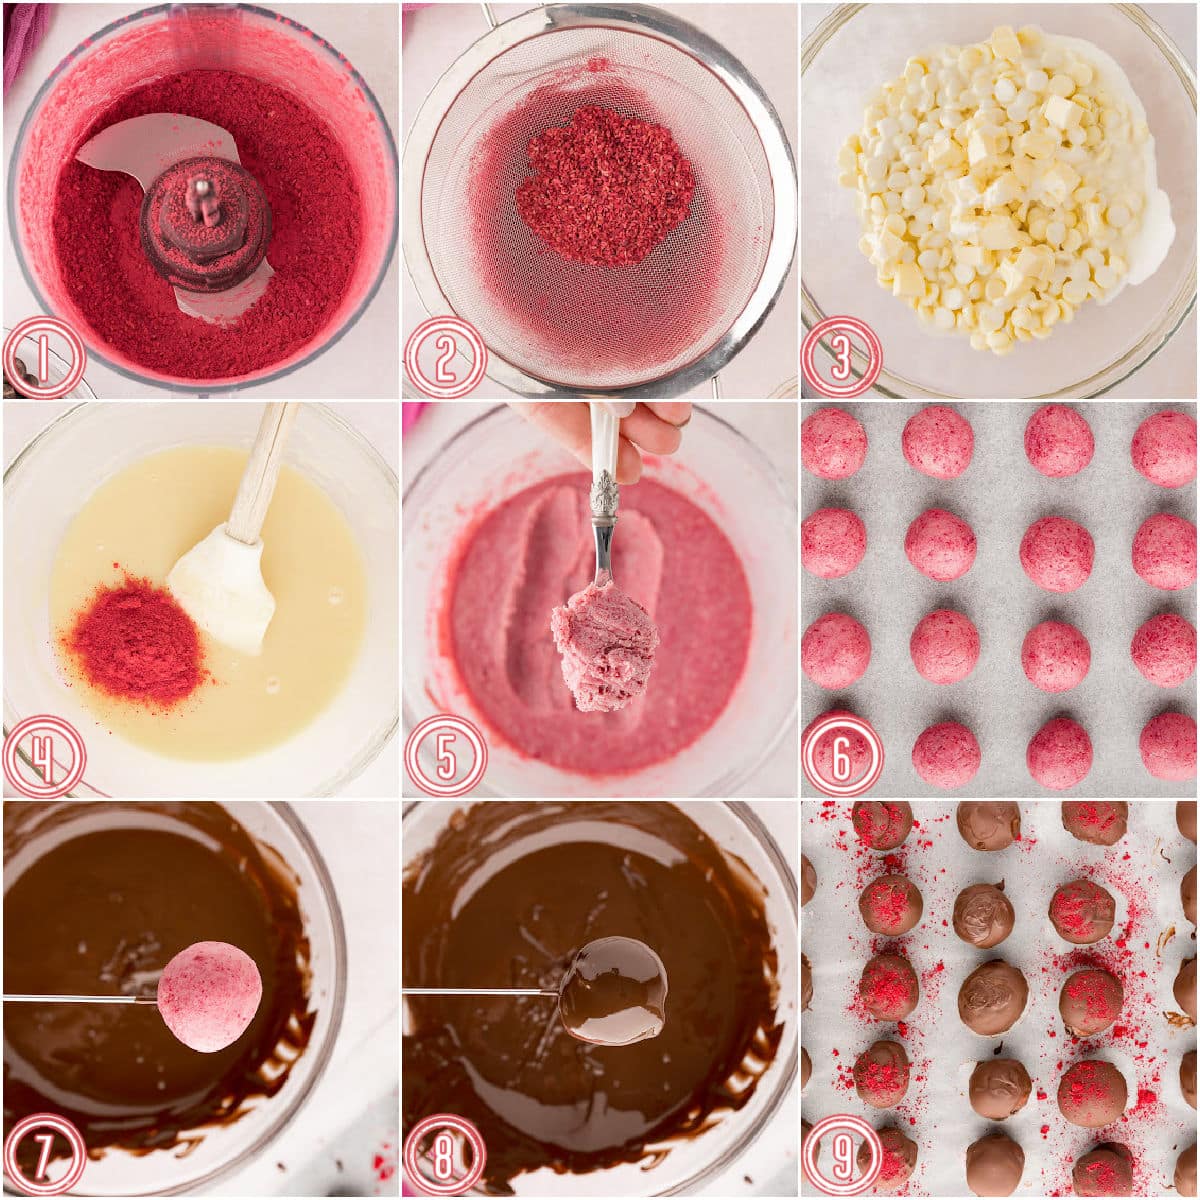 nine image collage showing how to make raspberry truffles step by step.